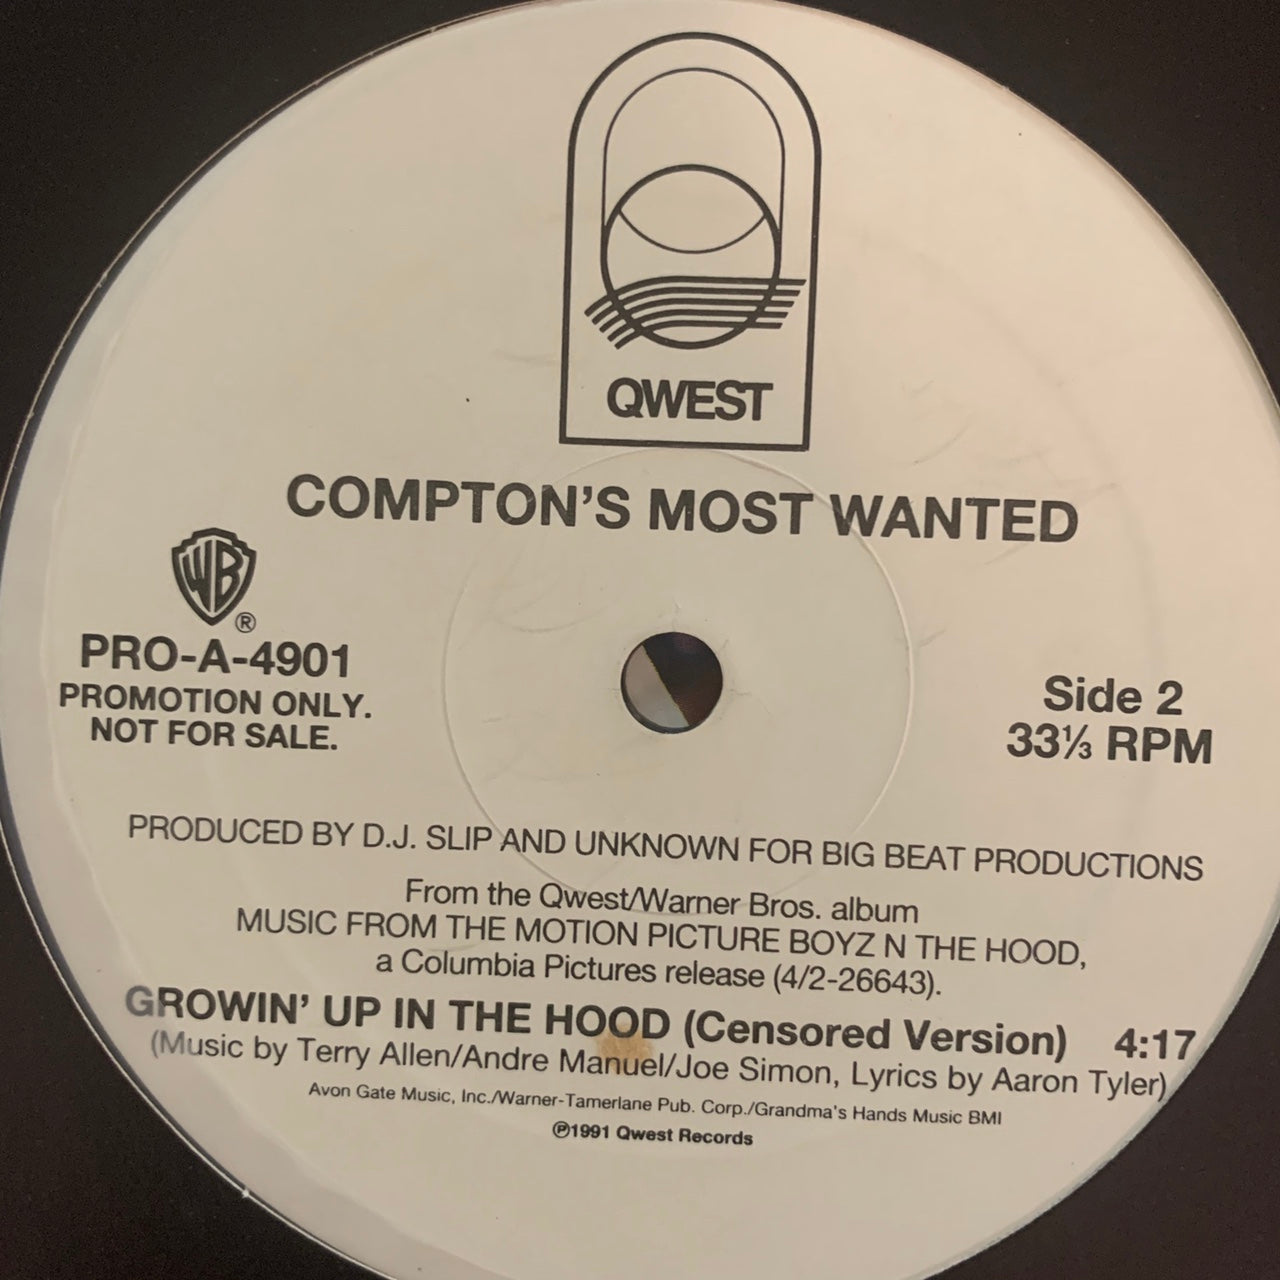 Comptons Most Wanted “Growin’ Up In The Hood” 2 Version 12inch Vinyl